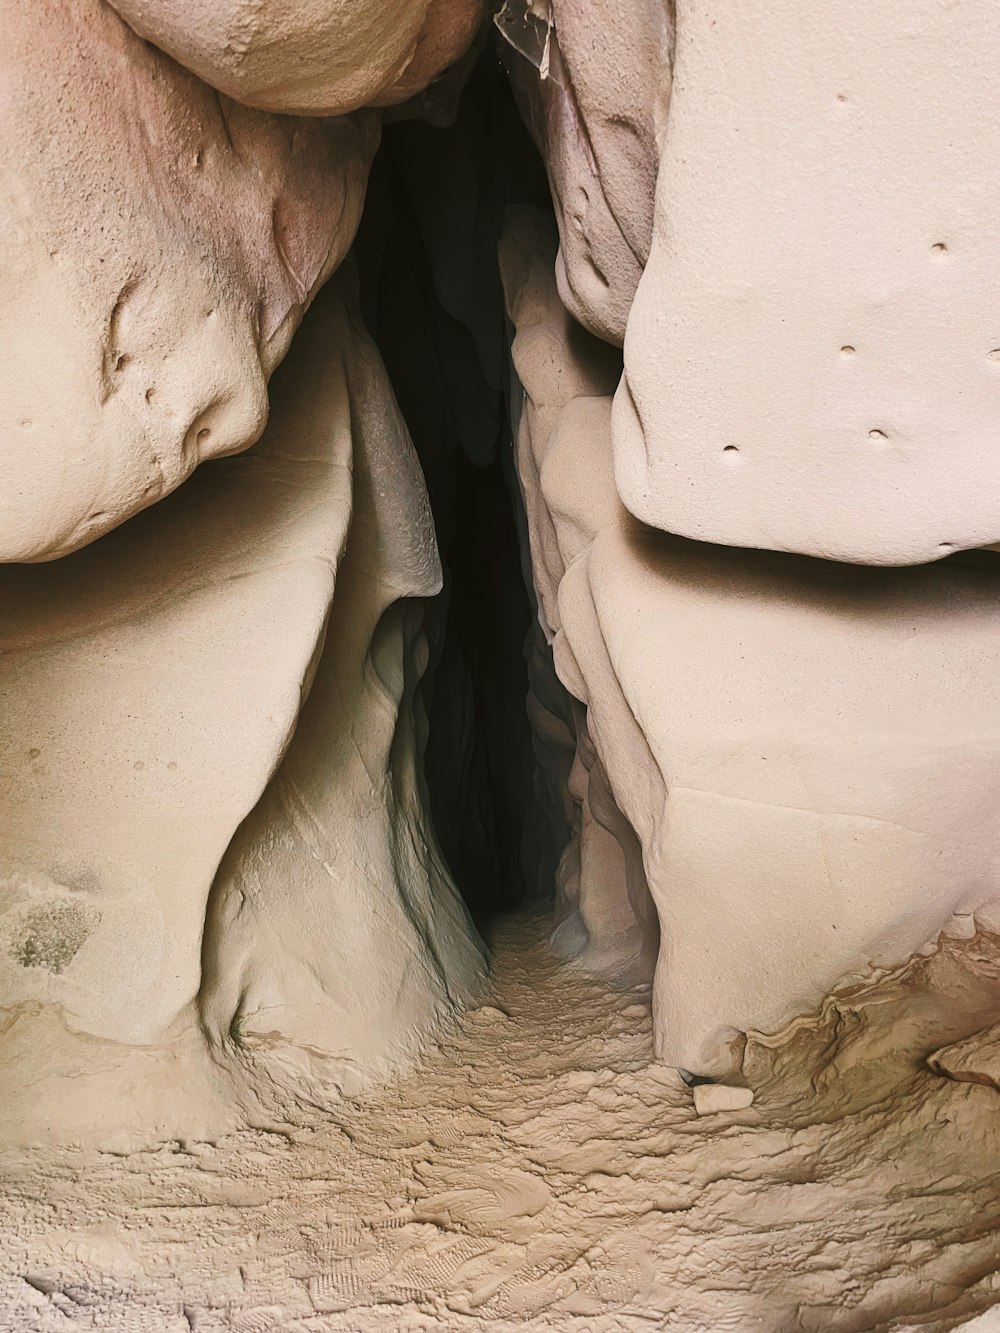 a view of the inside of a rock formation